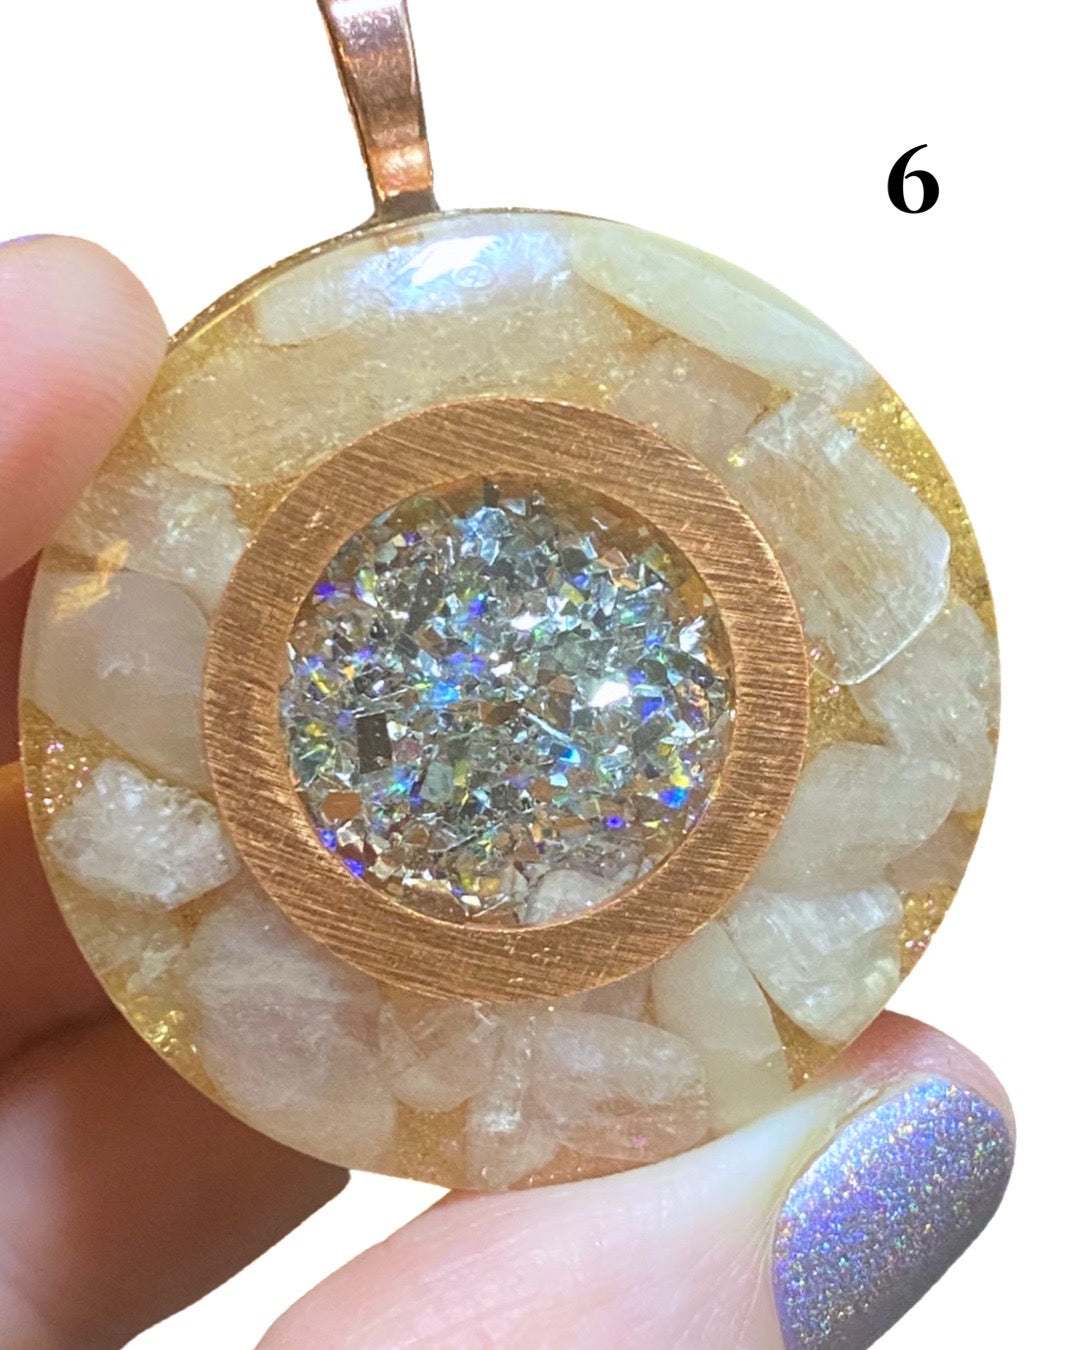 Crushed Opal Orgone Energy Pendant with Morgonite or Ruby